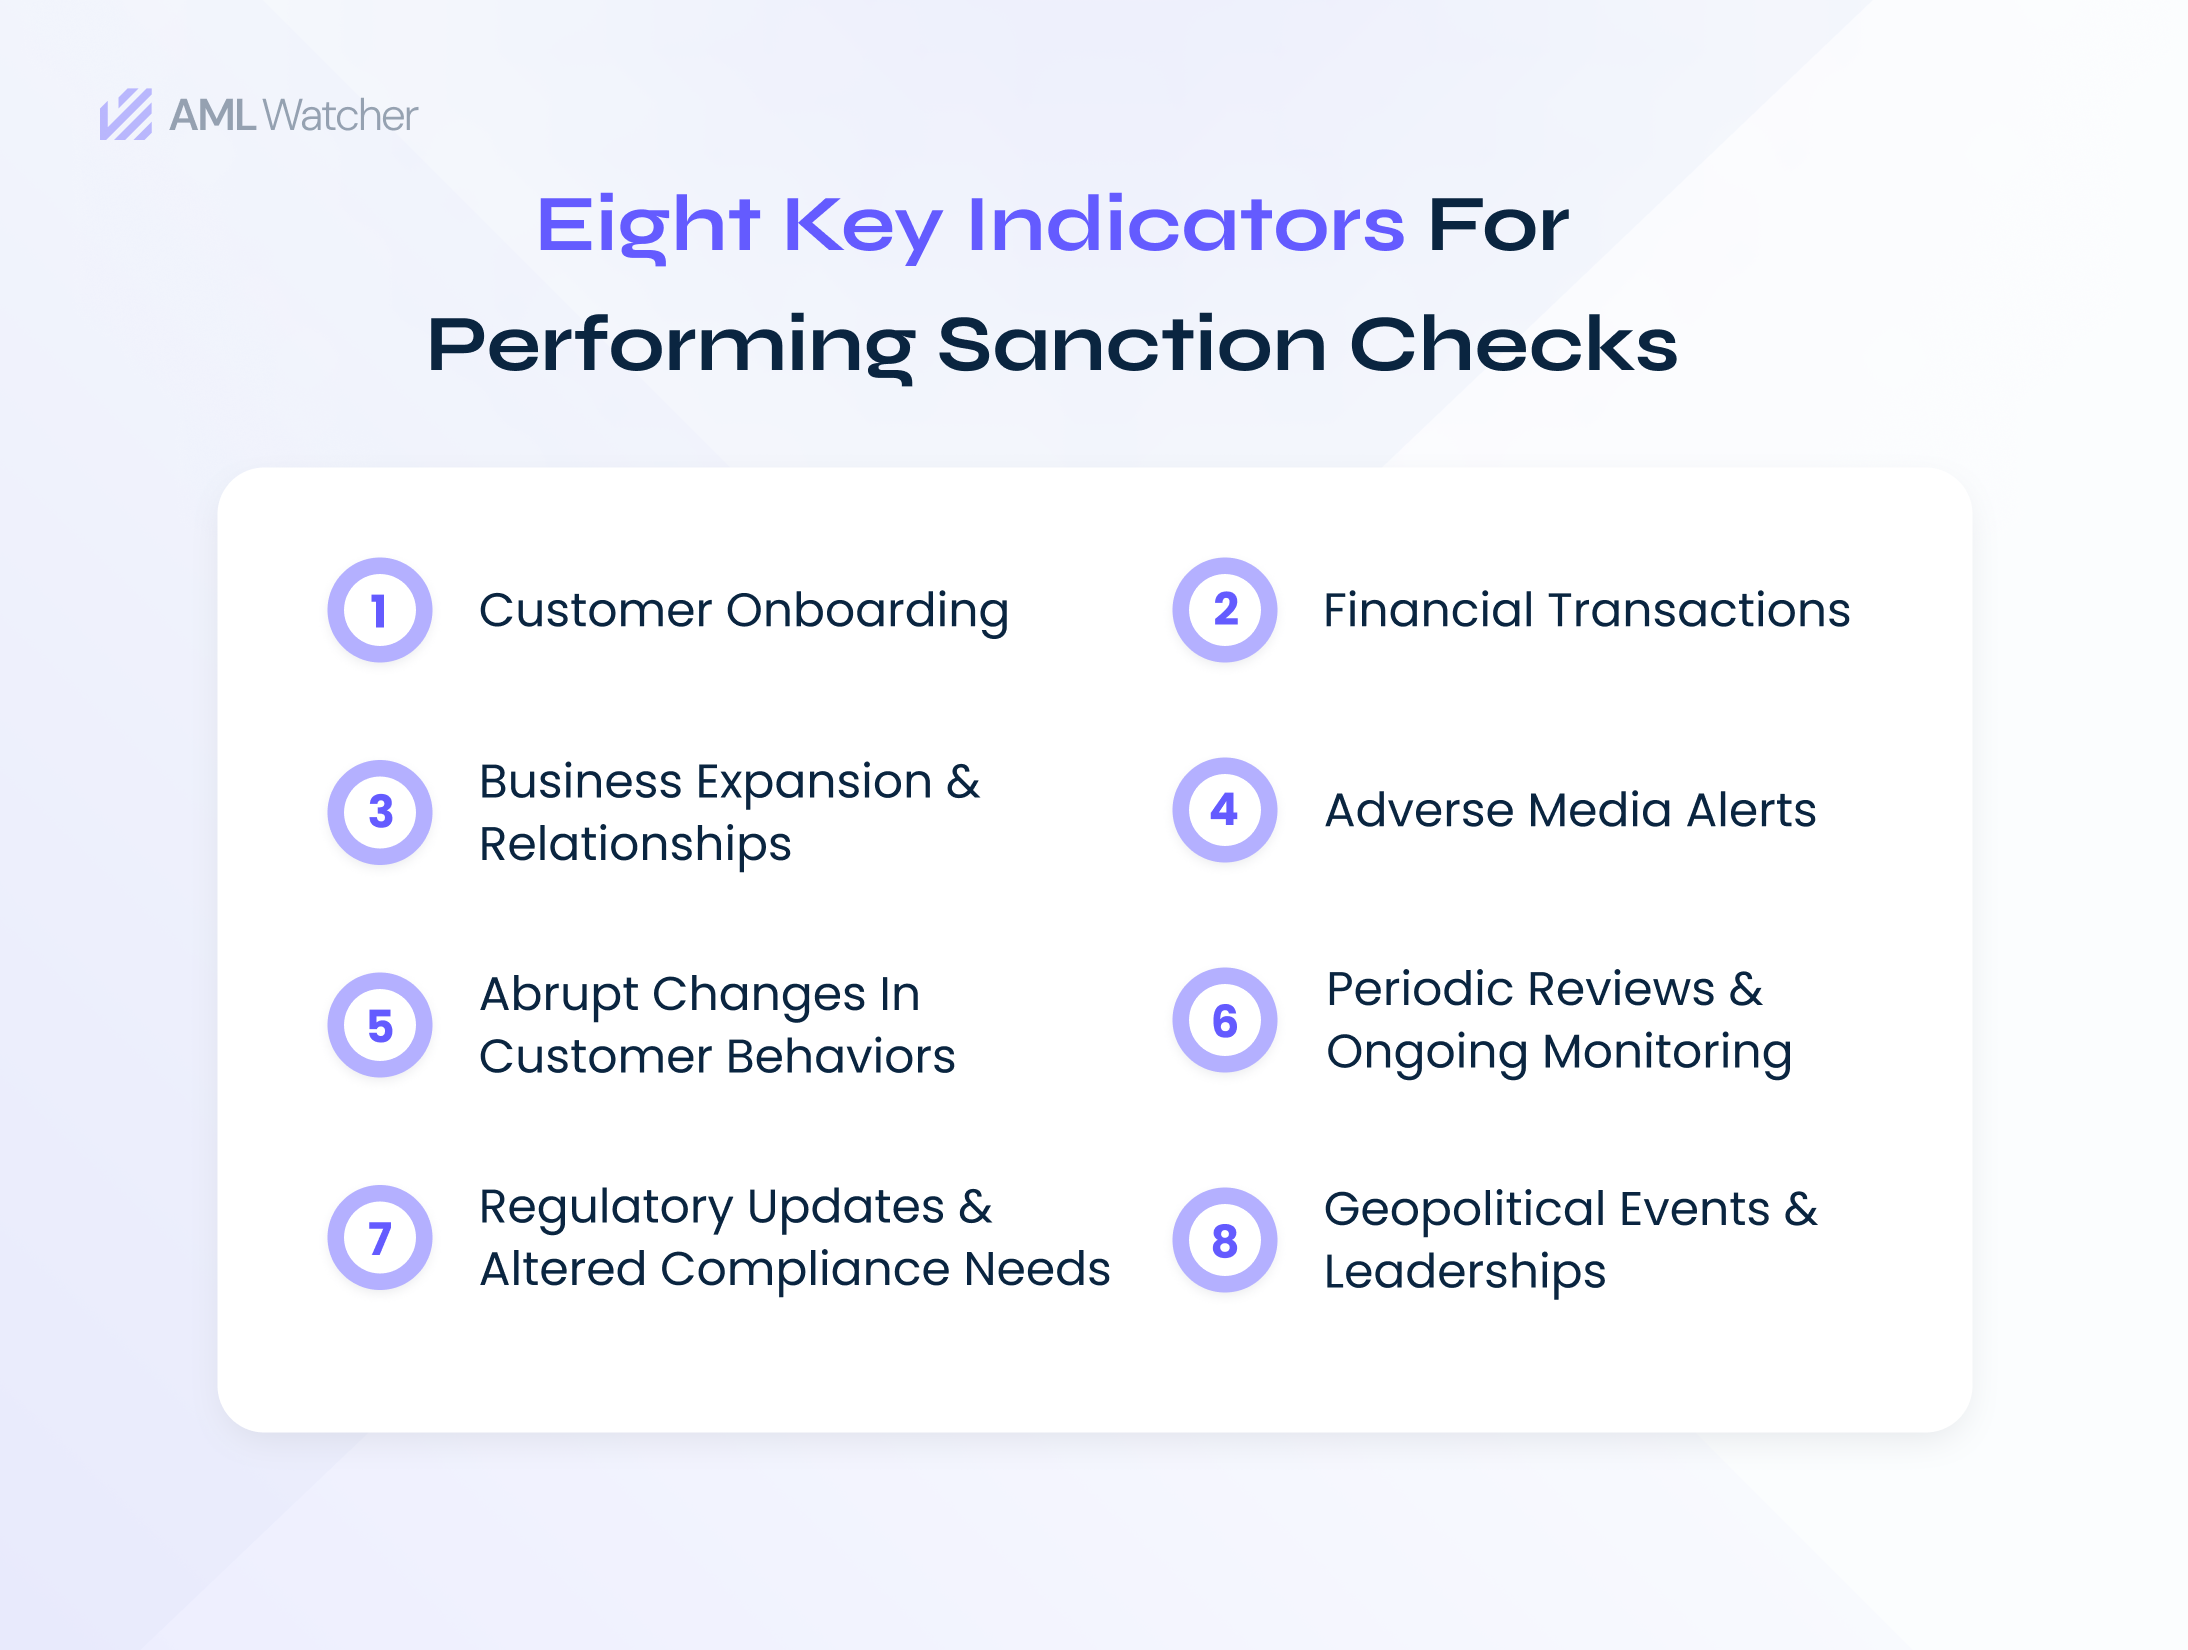 Key indicators showing when to perform sanction list checks including customer onboarding, business